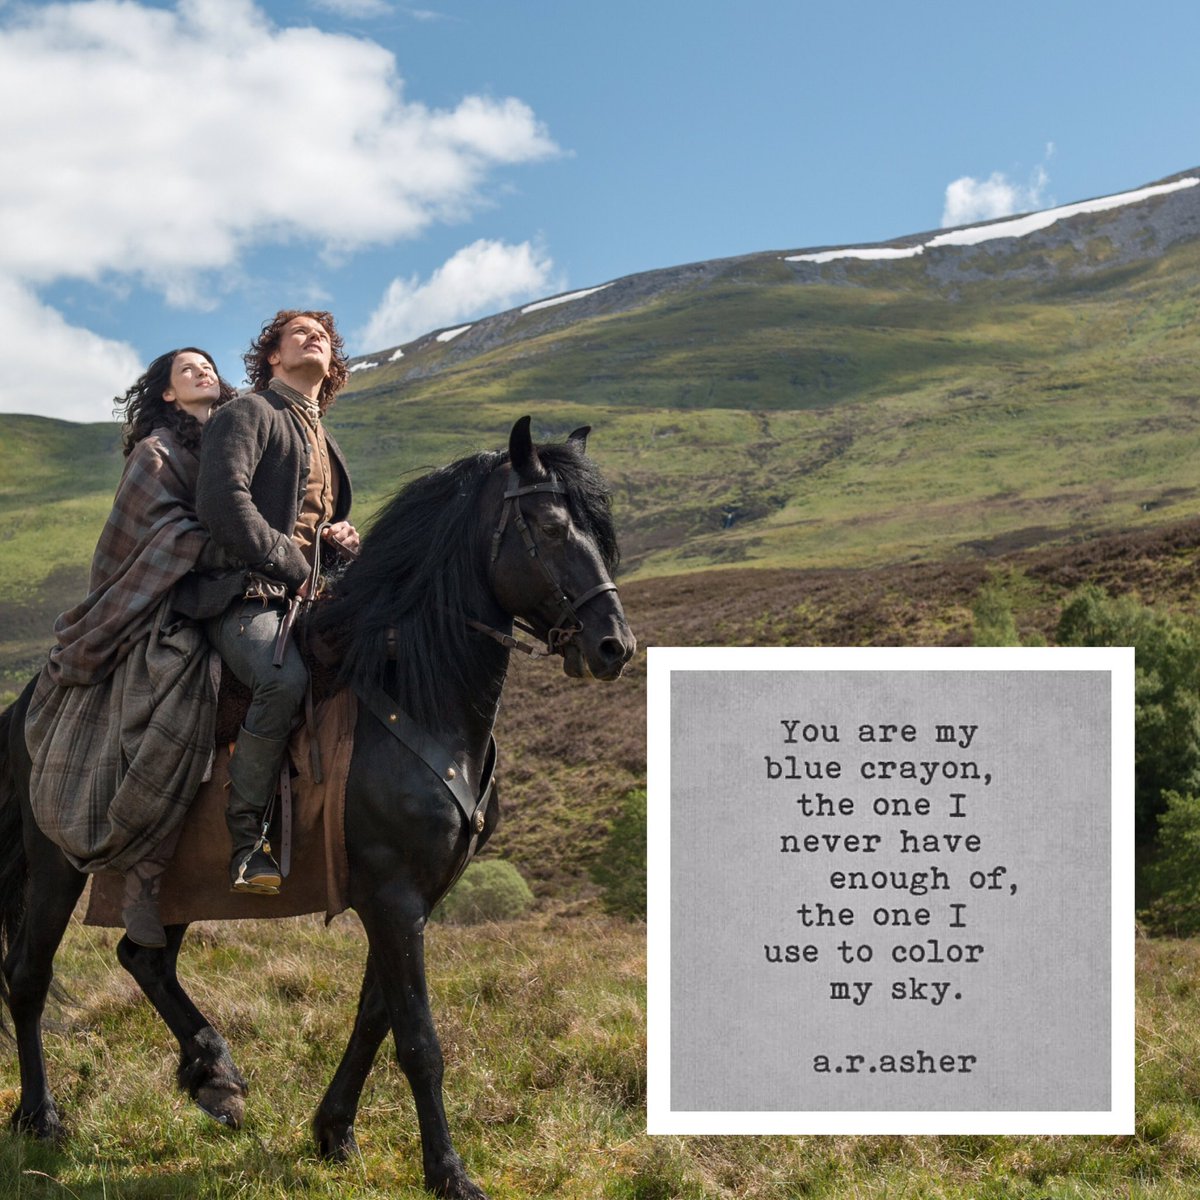 Love,  #Outlander  : A Thread of Pics and Quotes (all unattributed quotes of unknown authorship)